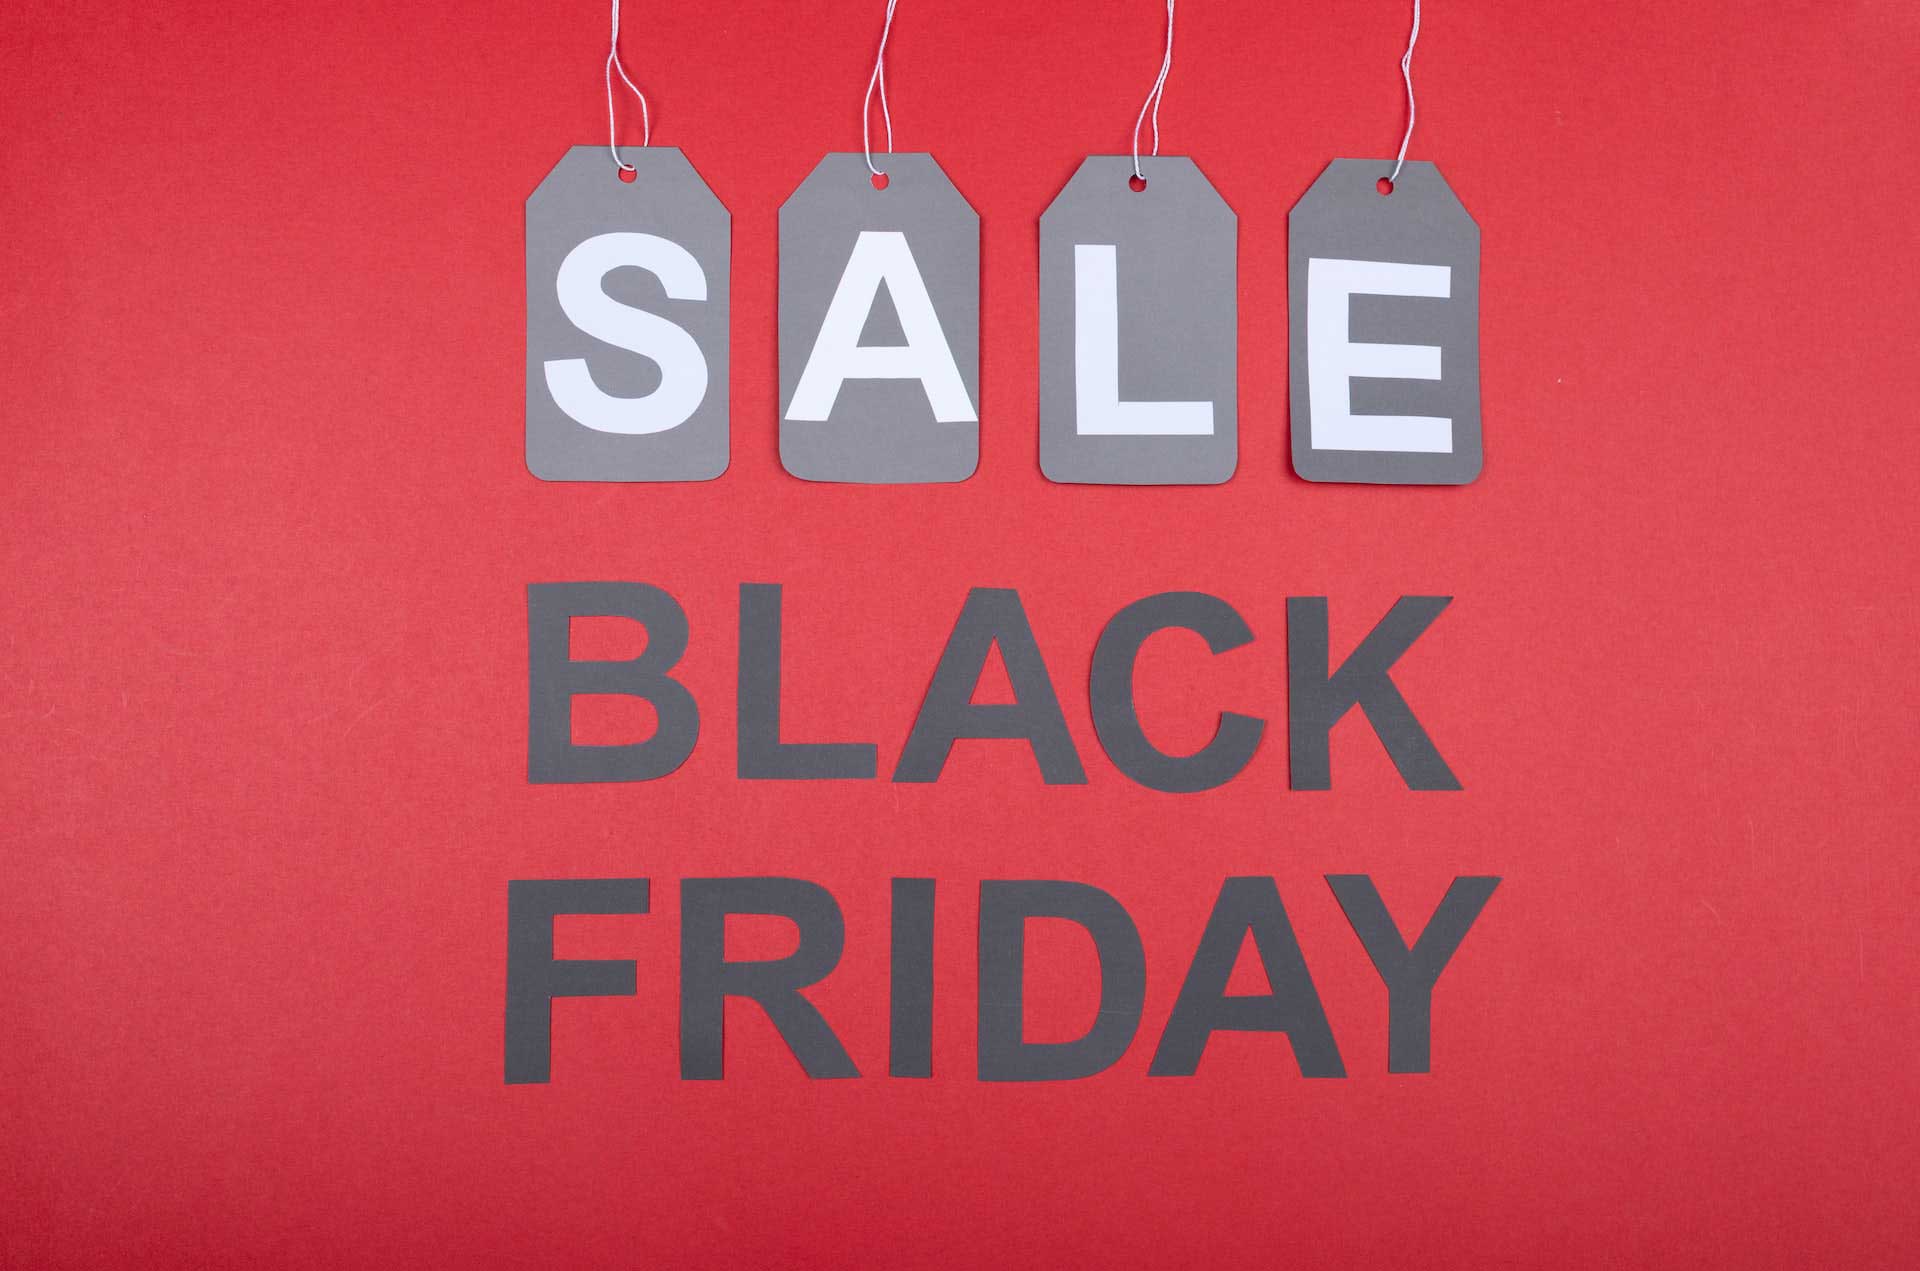 Ecommerce Marketing Agency Sample Of Good Black Friday Ecommerce Newsletter Creative. Red Background With Bold Black Friday Sale Text